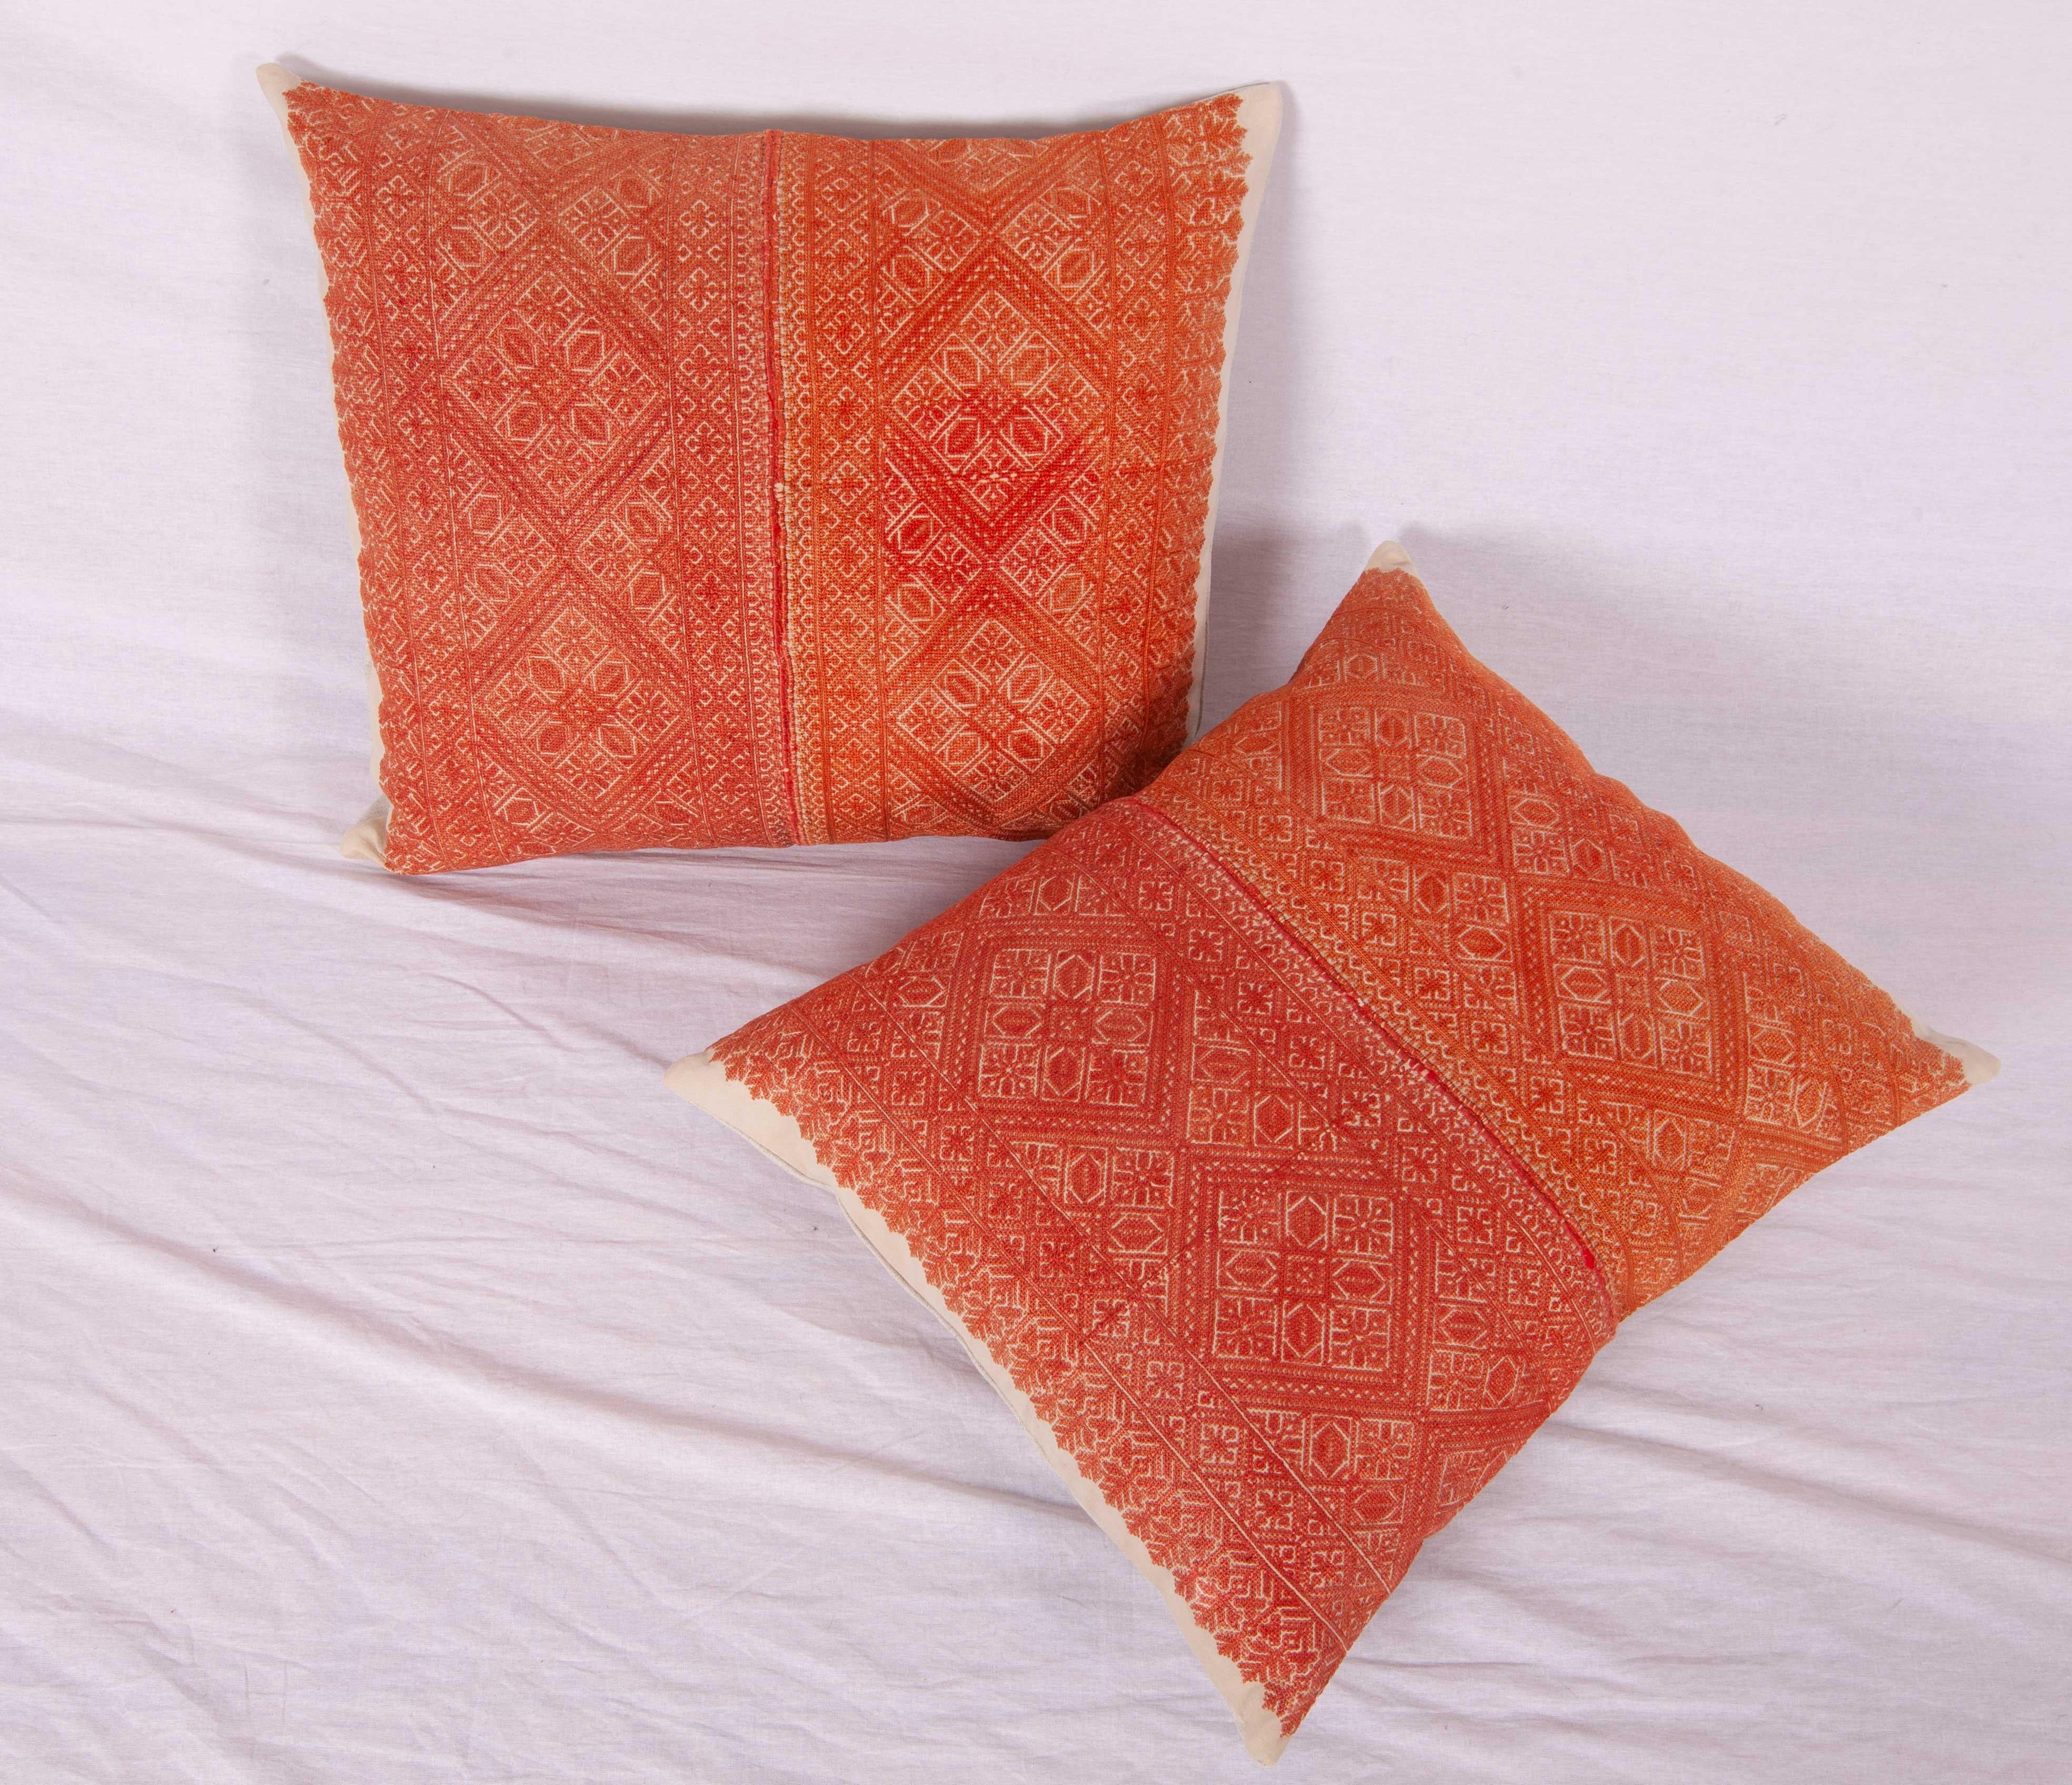 Moroccan Pillow Cases Made from an Early 20th Century Fez Embroidery from Morocco